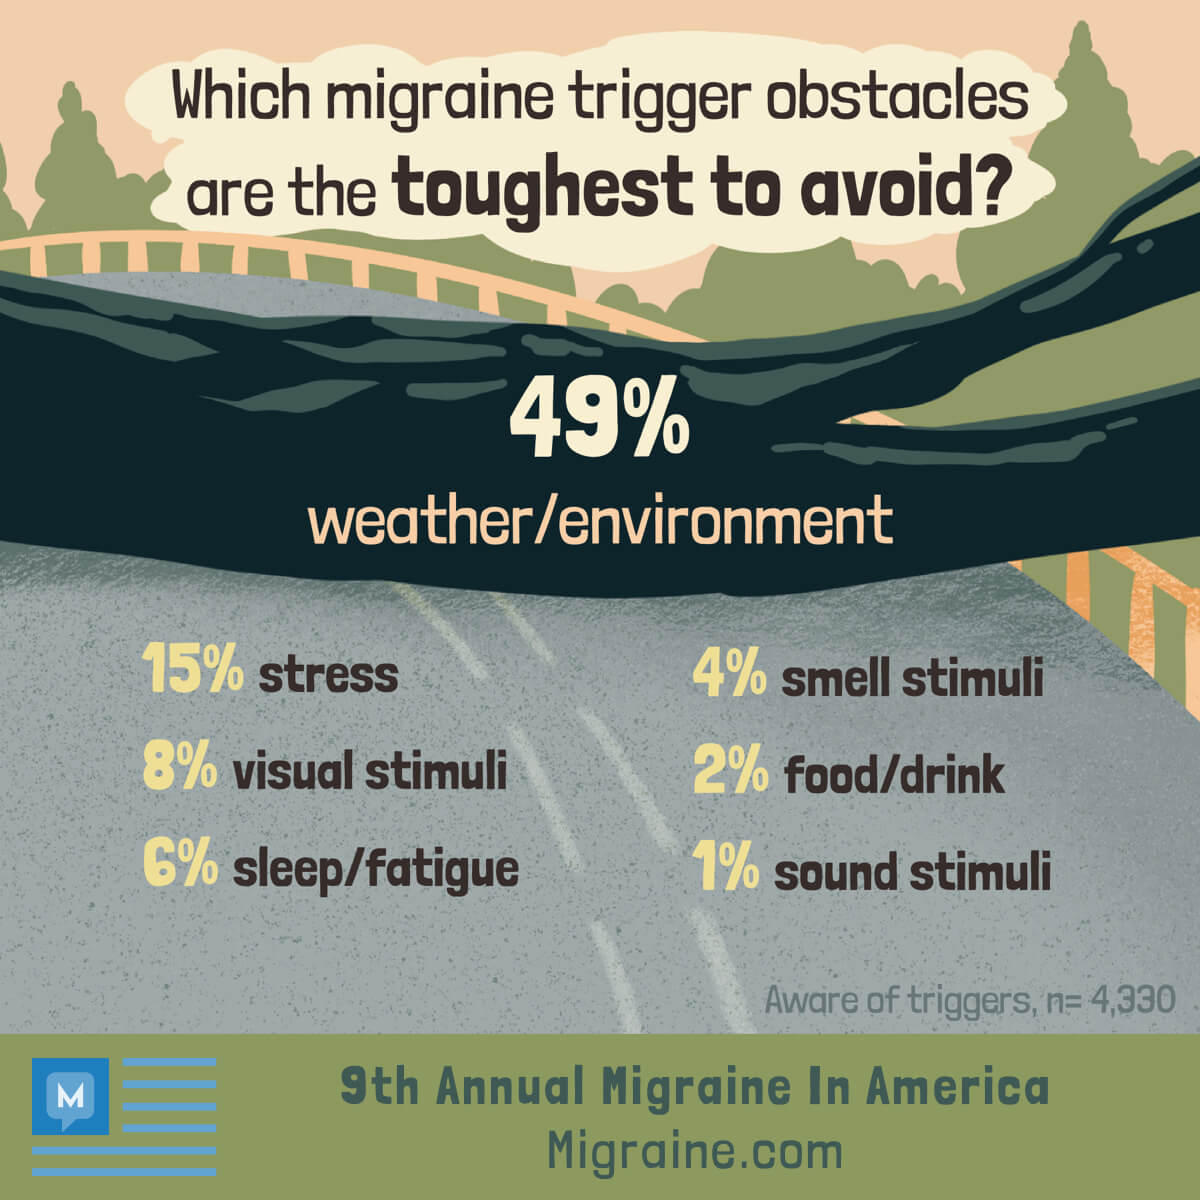 49% of Migraine In America survey respondents said that the weather/environment is the hardest trigger to avoid.